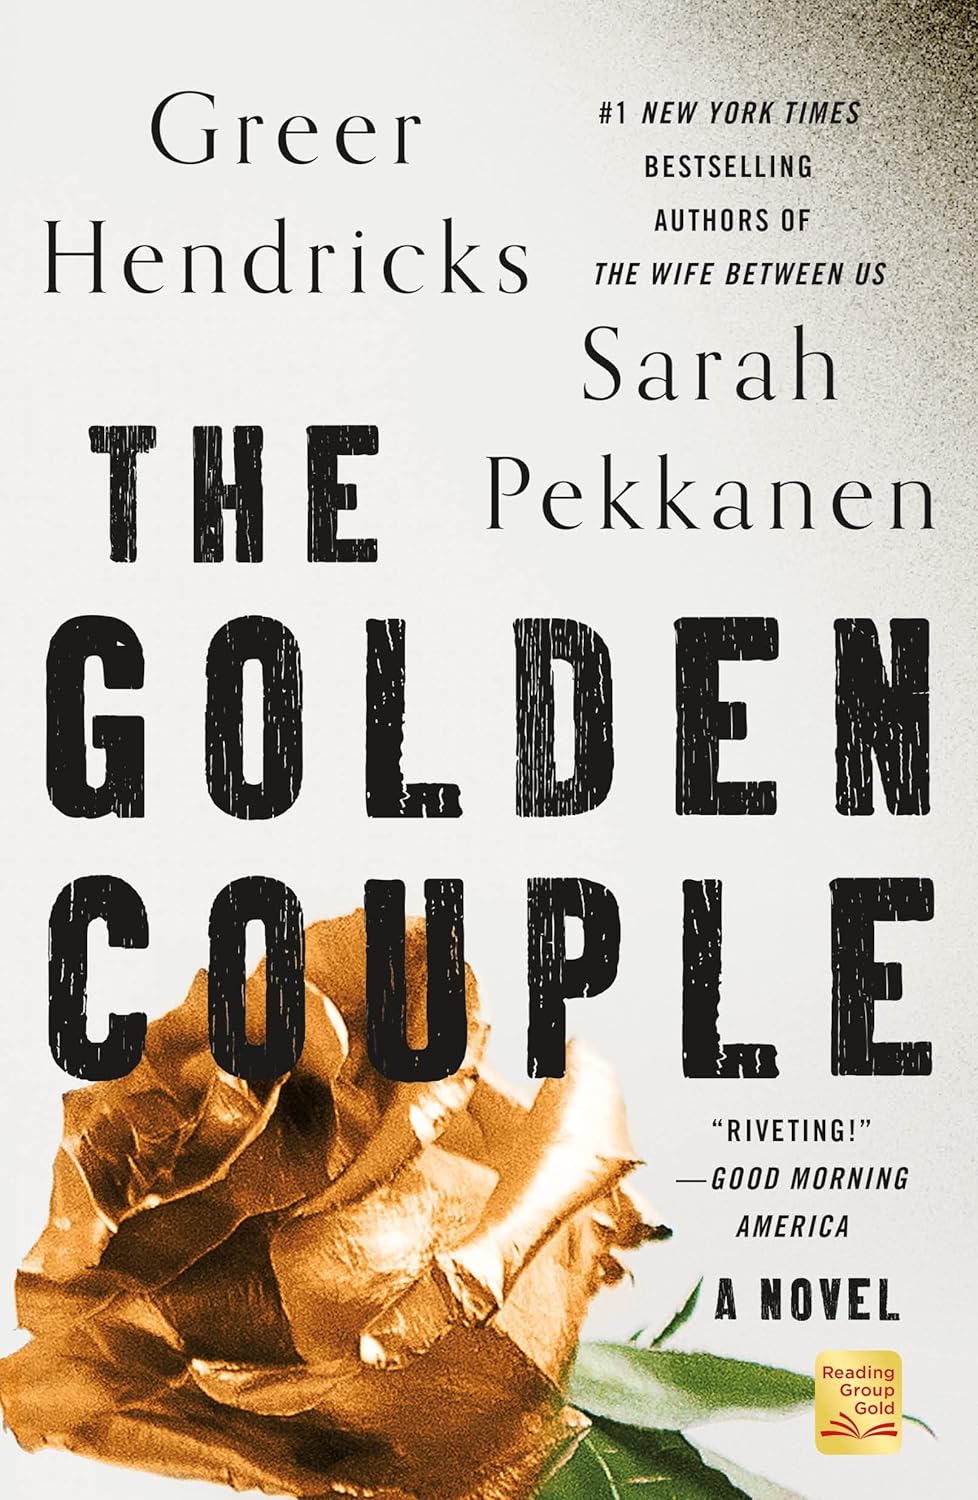 The Golden Couple (Paperback)